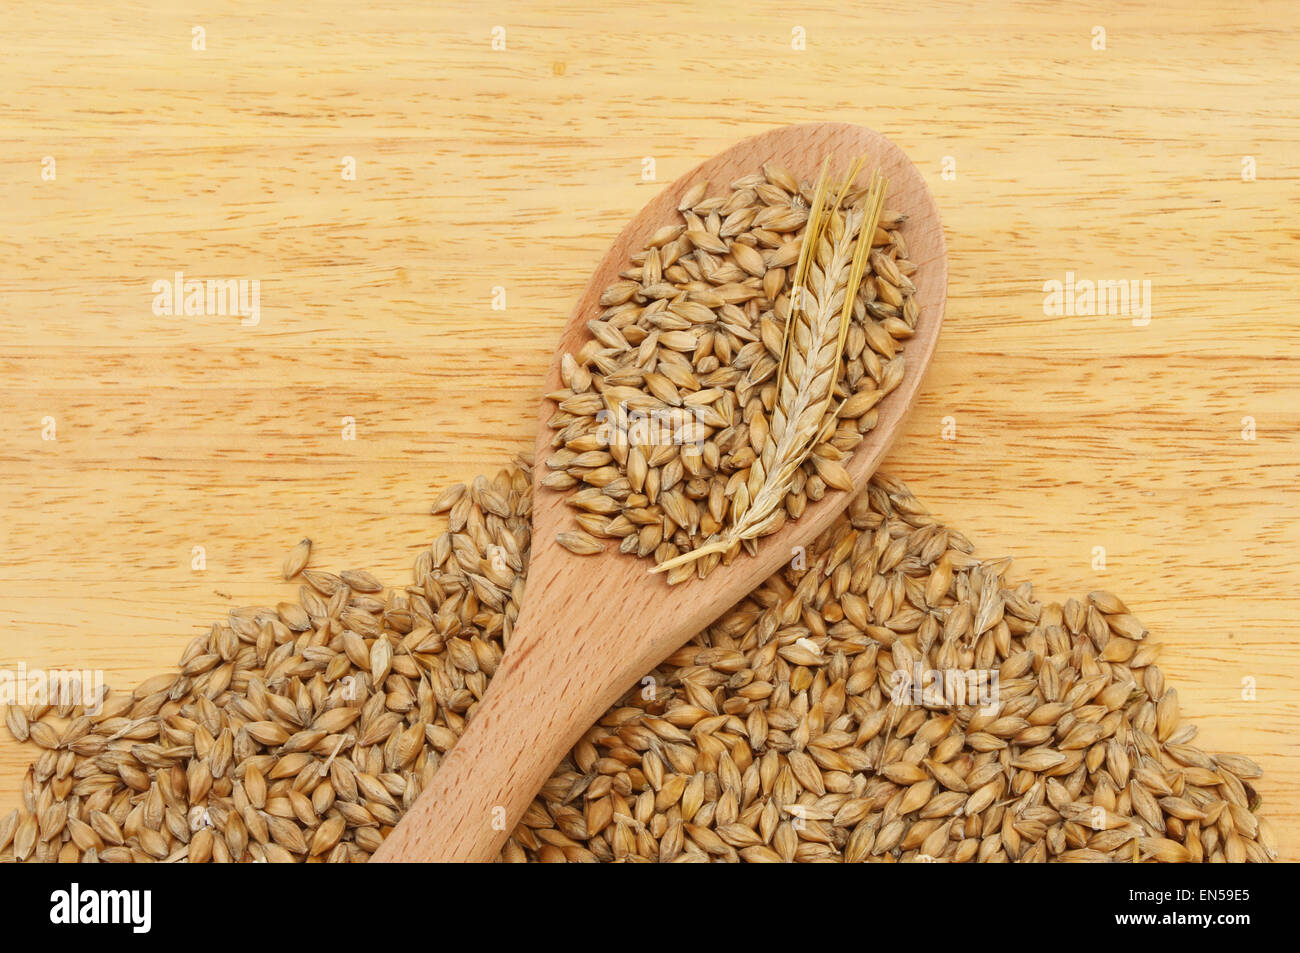 Grains and an ear of barley in and around a wooden spoon on a wooden board Stock Photo